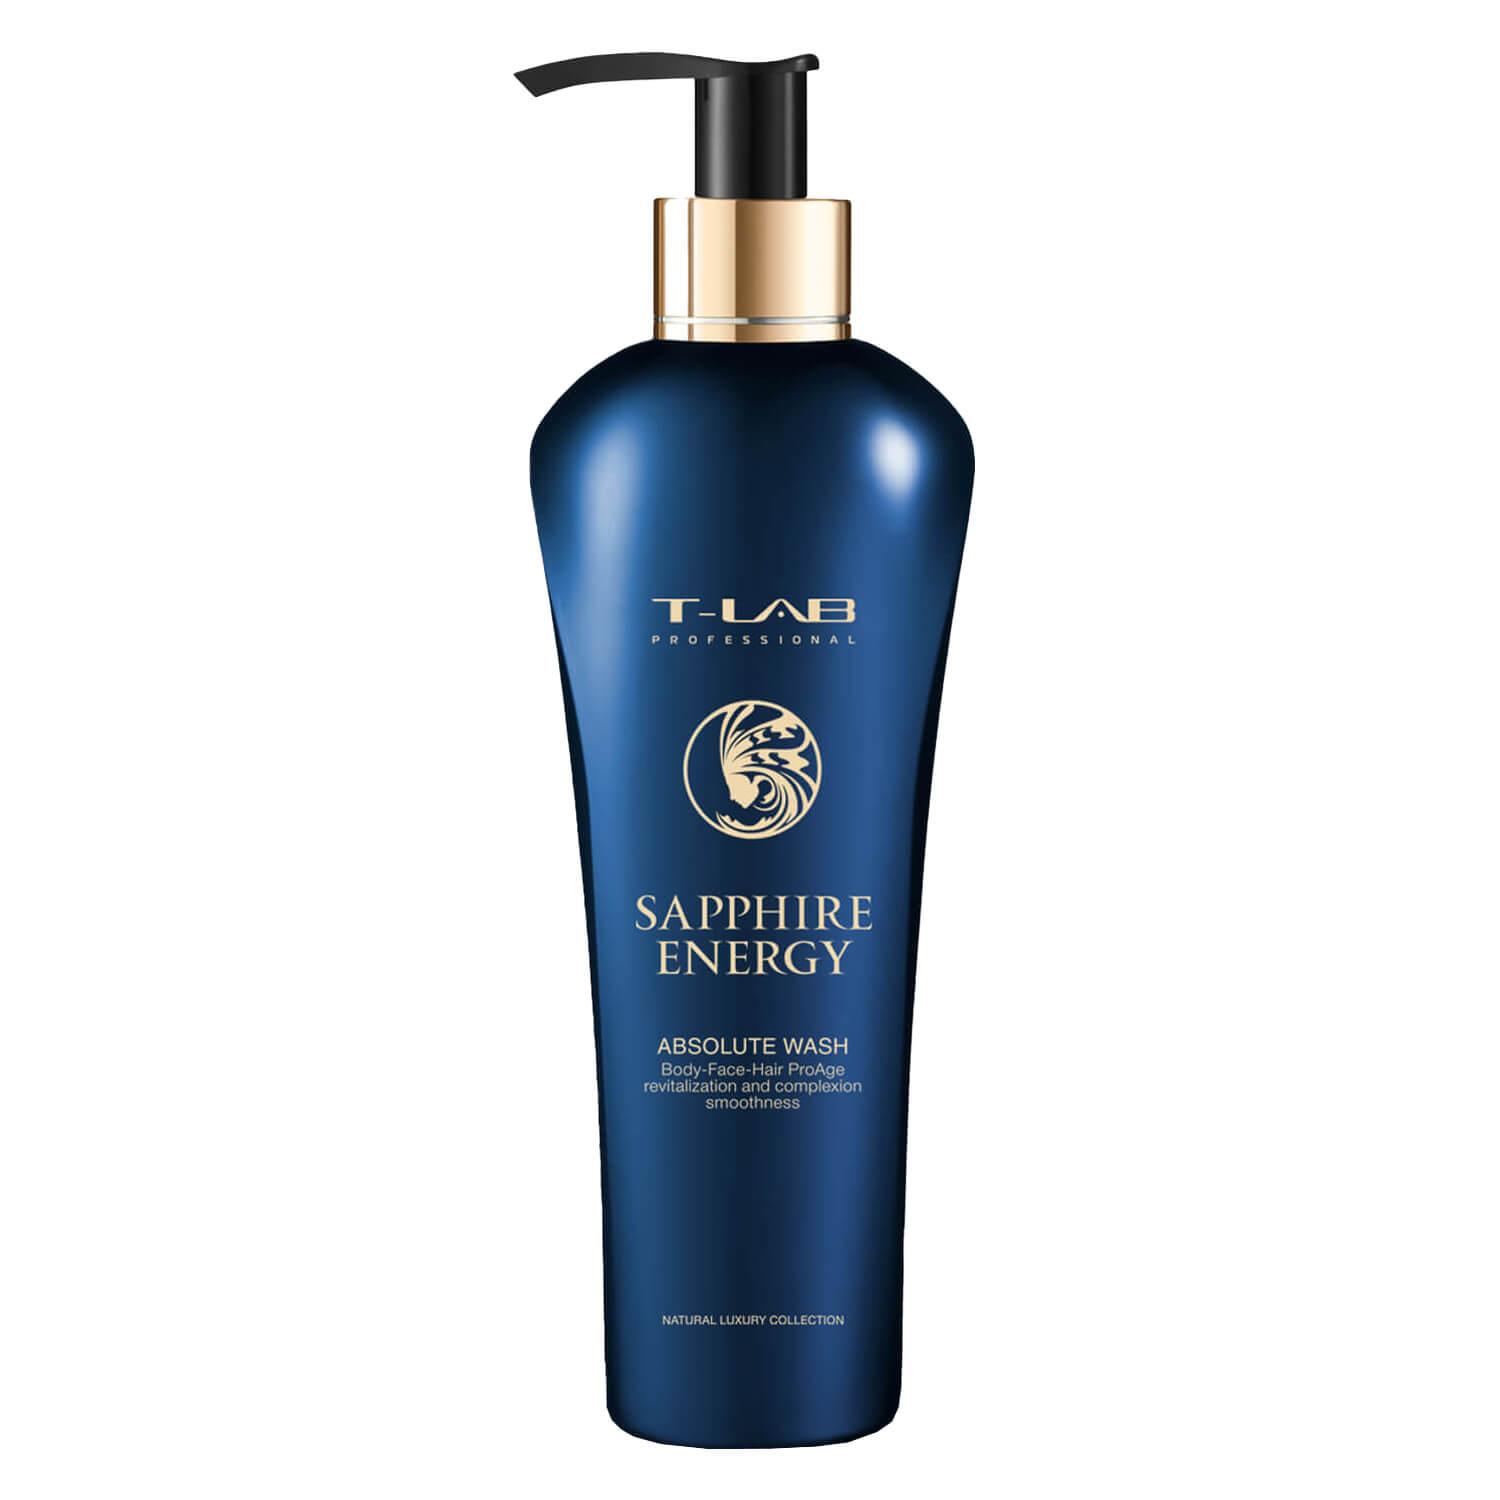 Sapphire Energy Absolute Wash